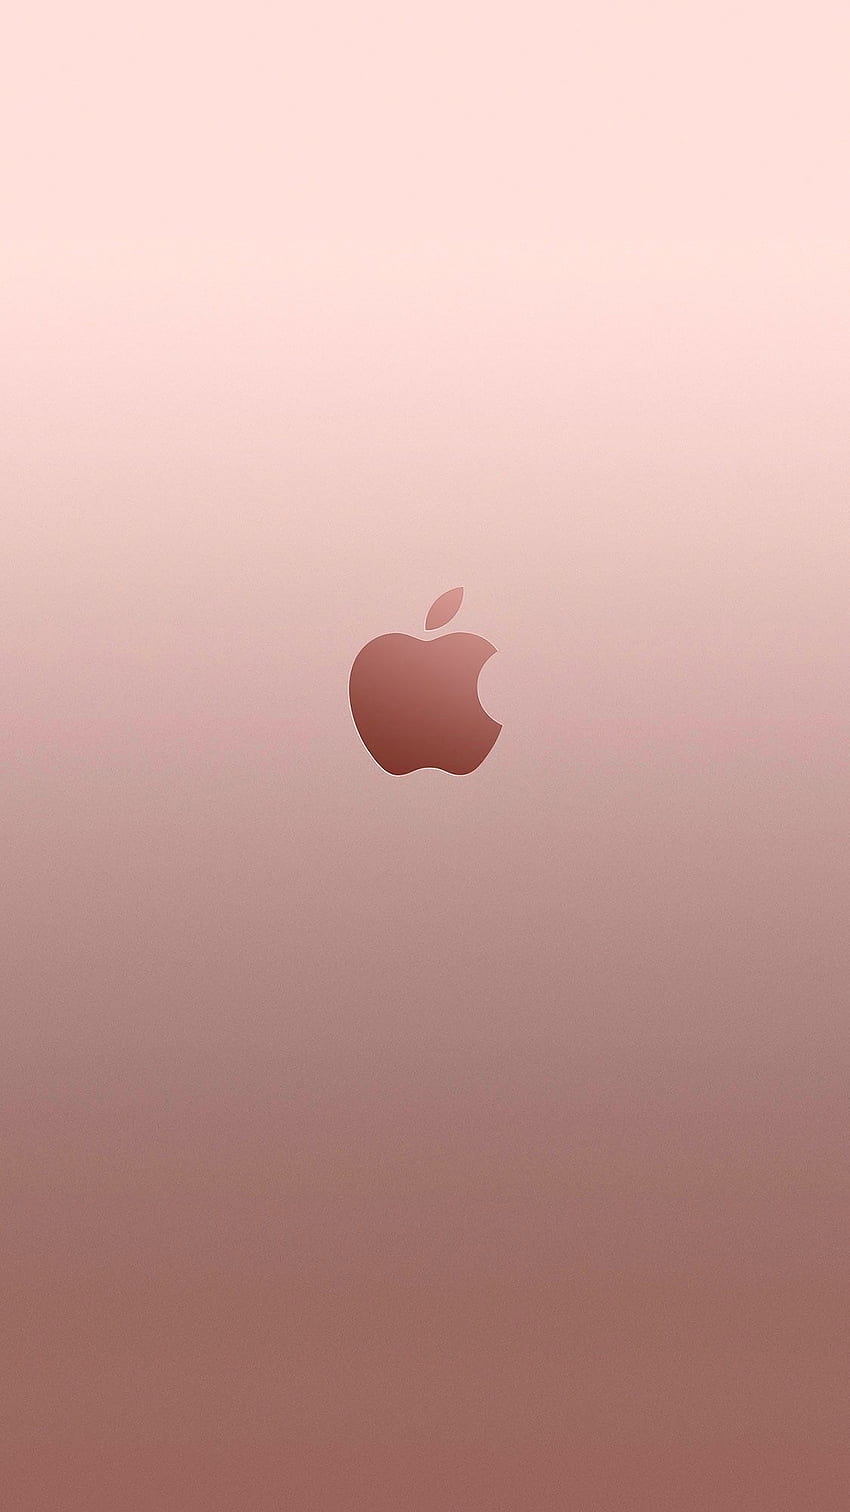 Apple rose gold iphone . iphone in 2019. apple. Gold iphone ...